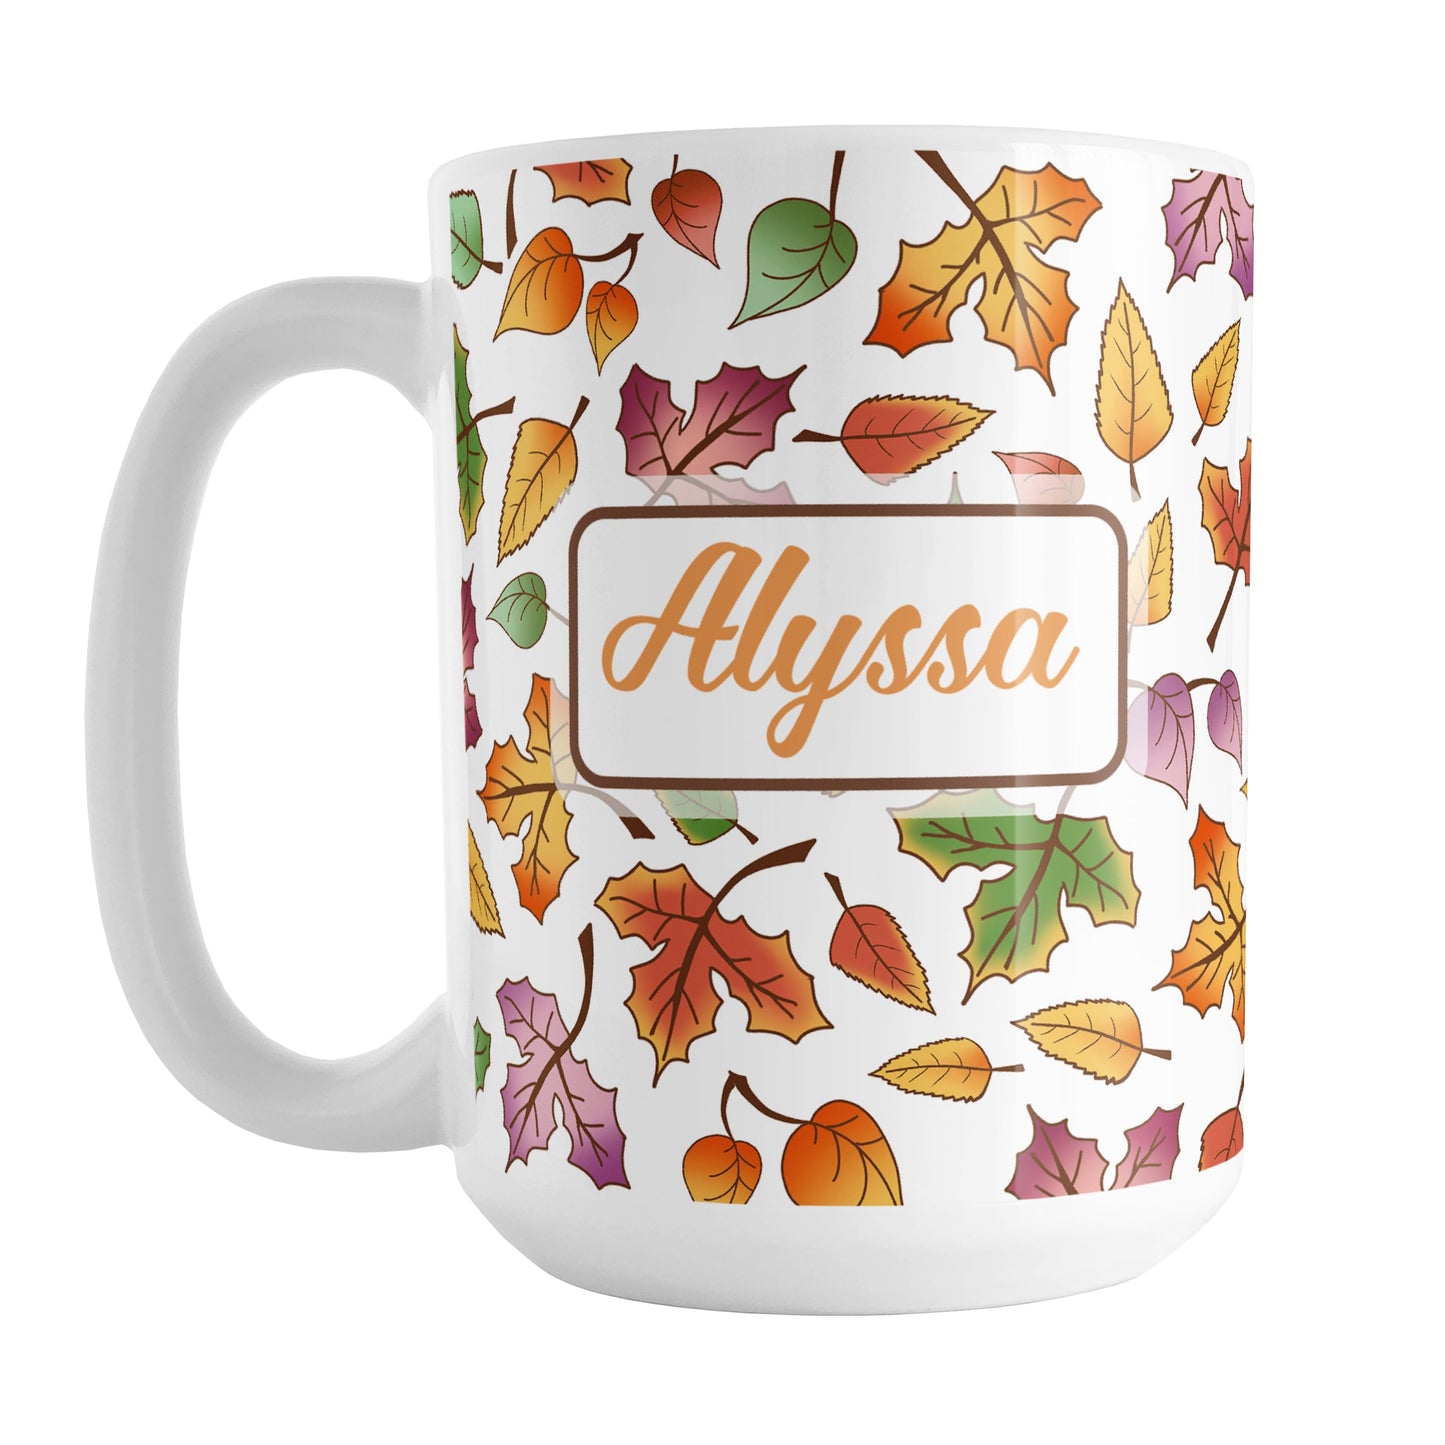 Personalized Changing Leaves Fall Mug (15oz) at Amy's Coffee Mugs. A ceramic coffee mug designed with a fall themed pattern of leaves changing colors, as they do at the beginning of autumn, that wraps around the mug. Your personalized name is custom printed in an orange script font on both sides of the mug over the leaves pattern.